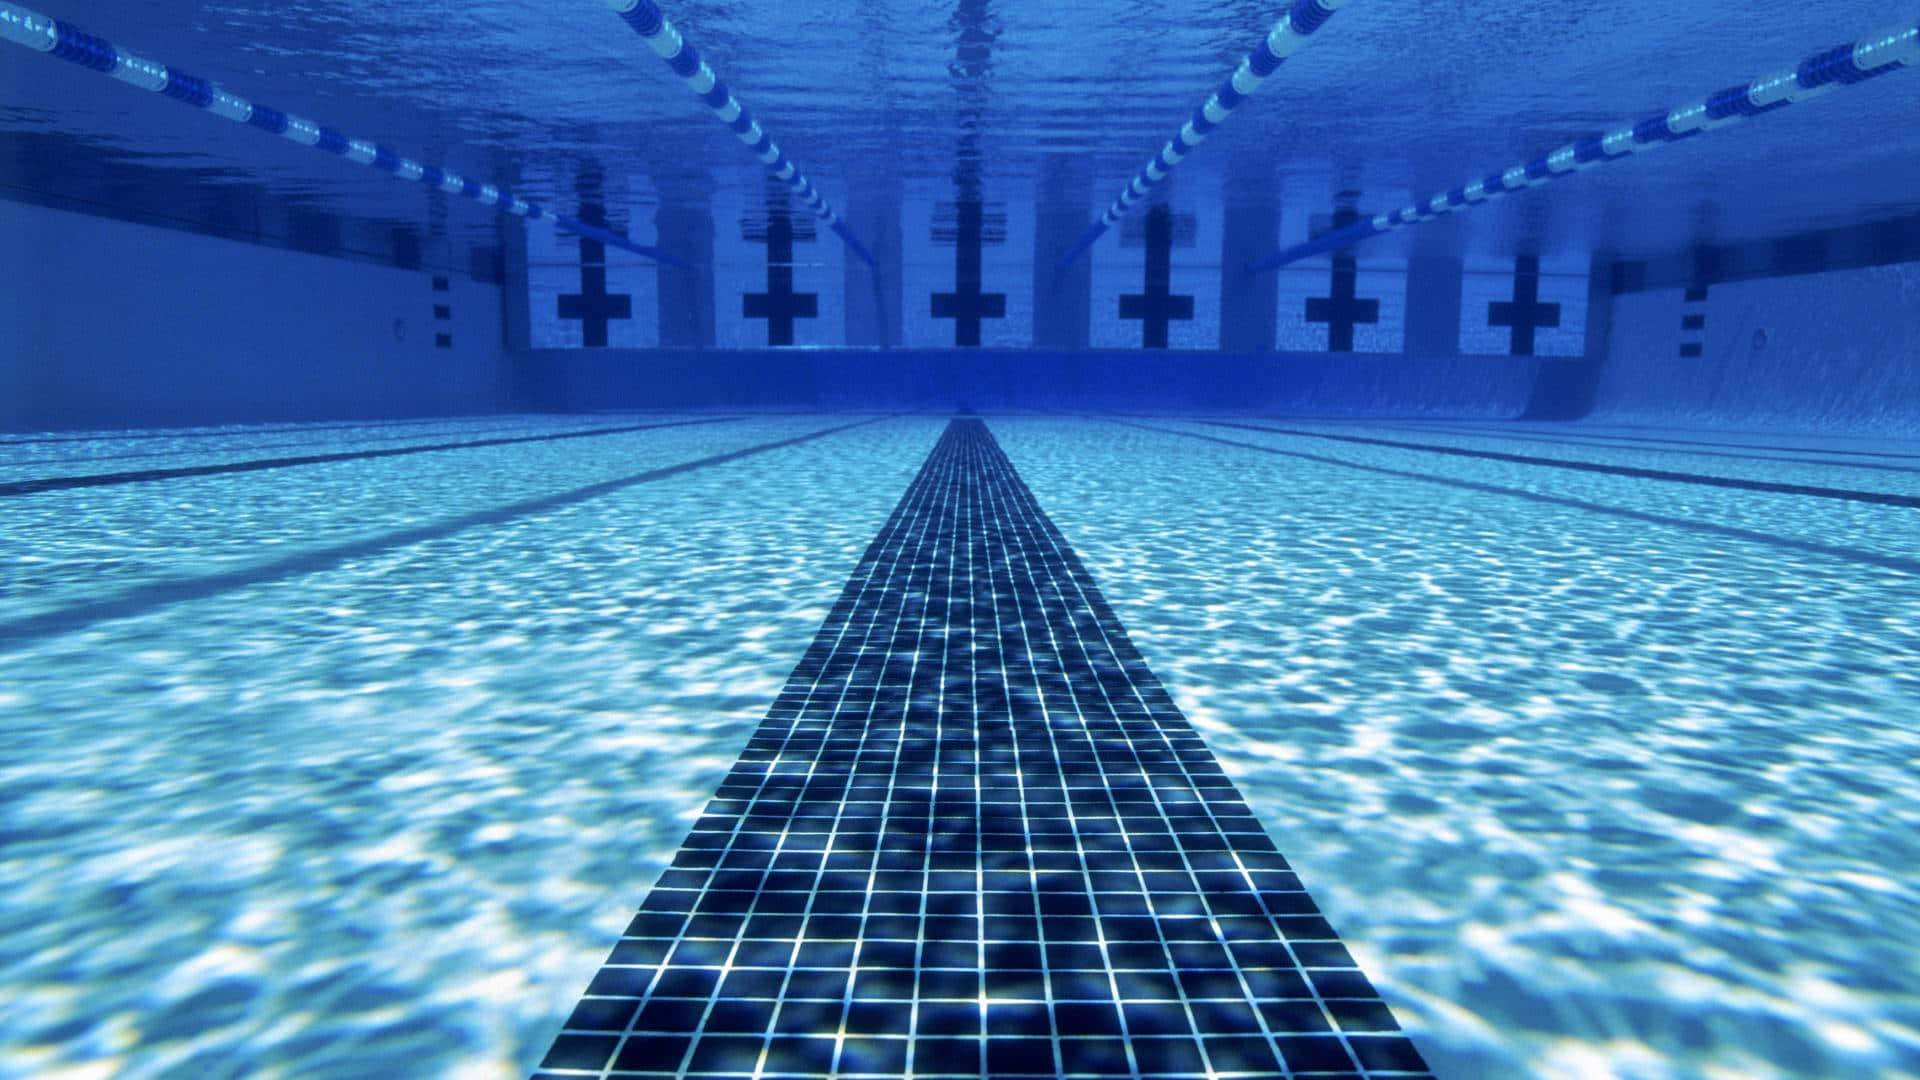 Swimming Sports Pool background